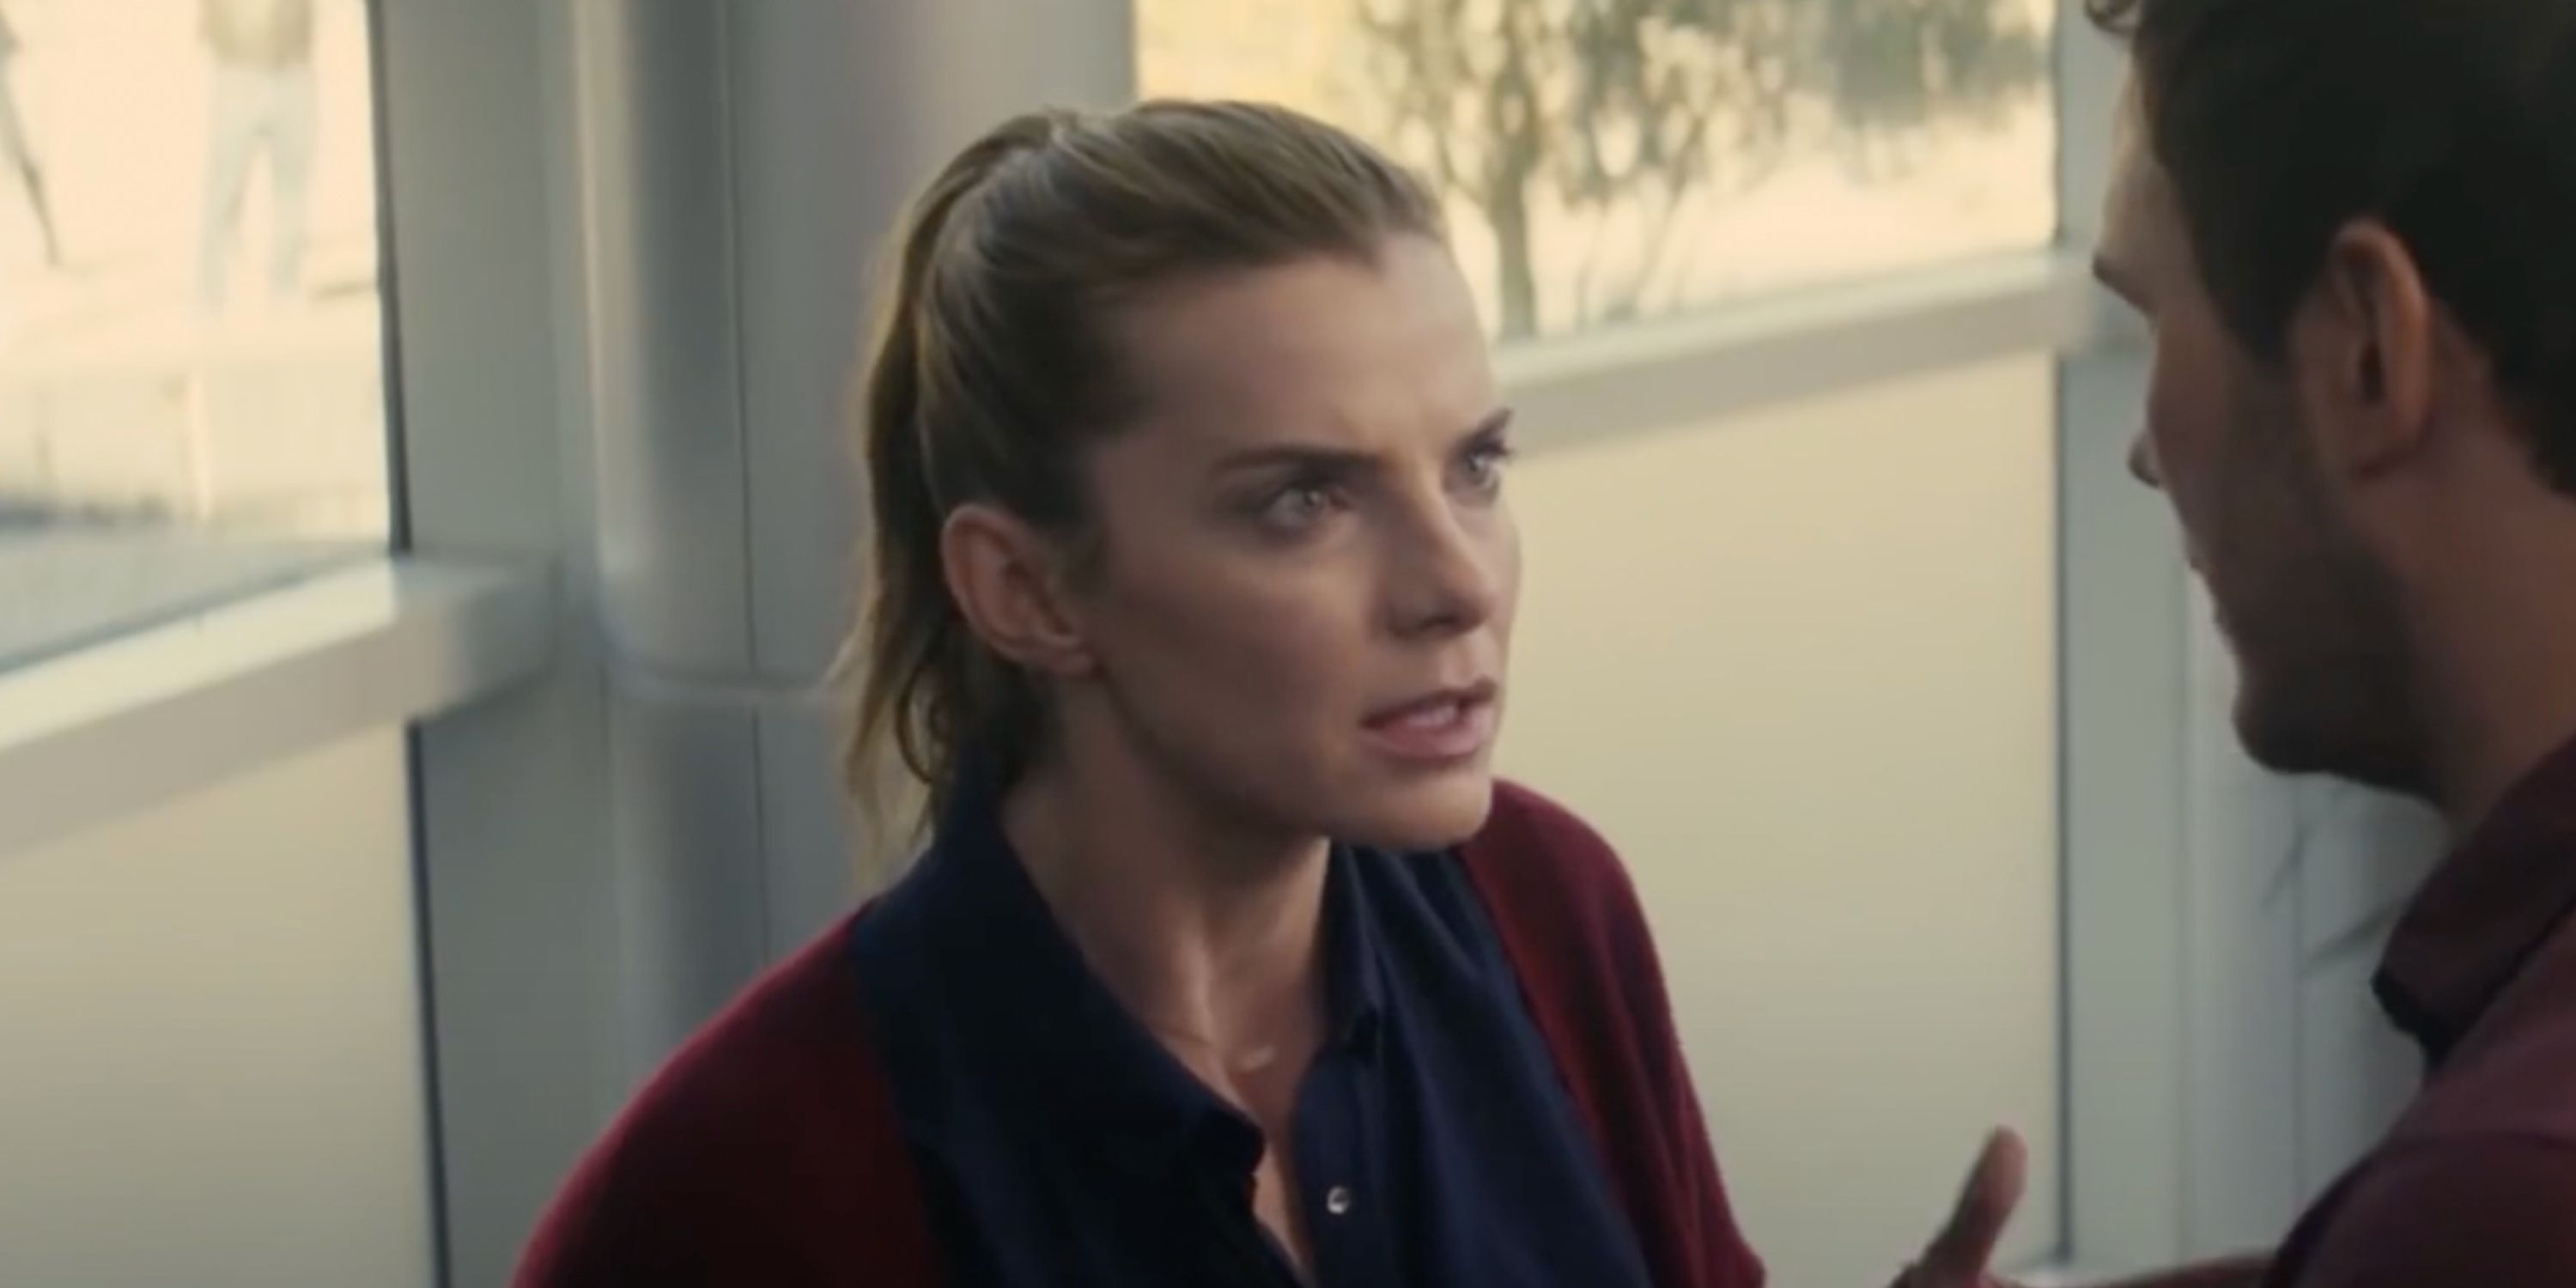 Betty Gilpin as Emmy Forester in The Tomorrow War on Amazon Prime